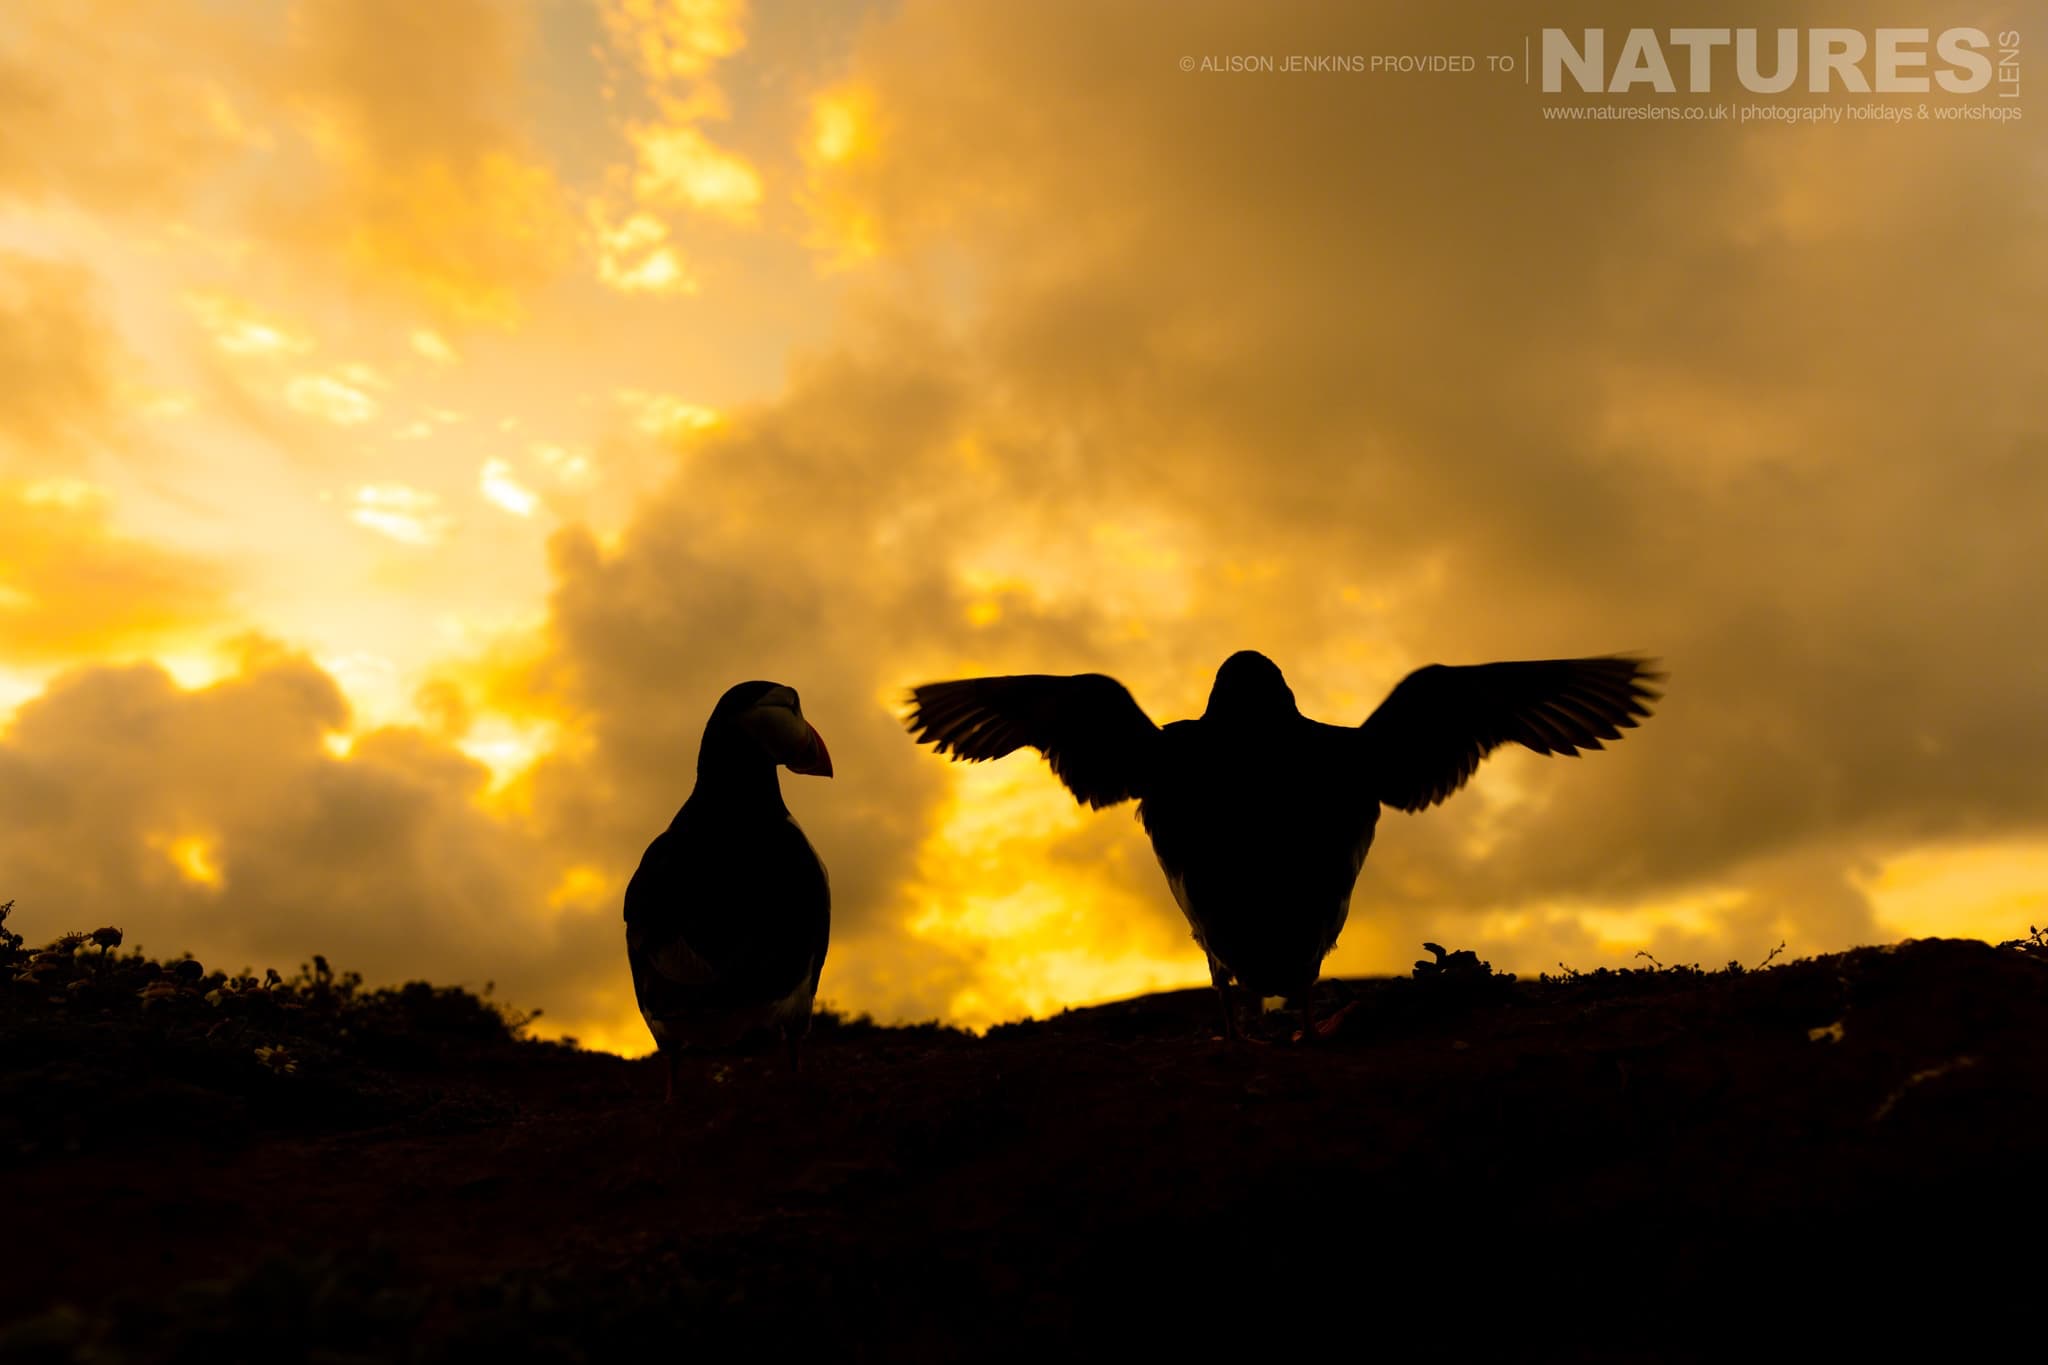 A Pair Of The Puffins Of Skomer, One Stretching It'S Wings, With A Moody Evening Sky Behind